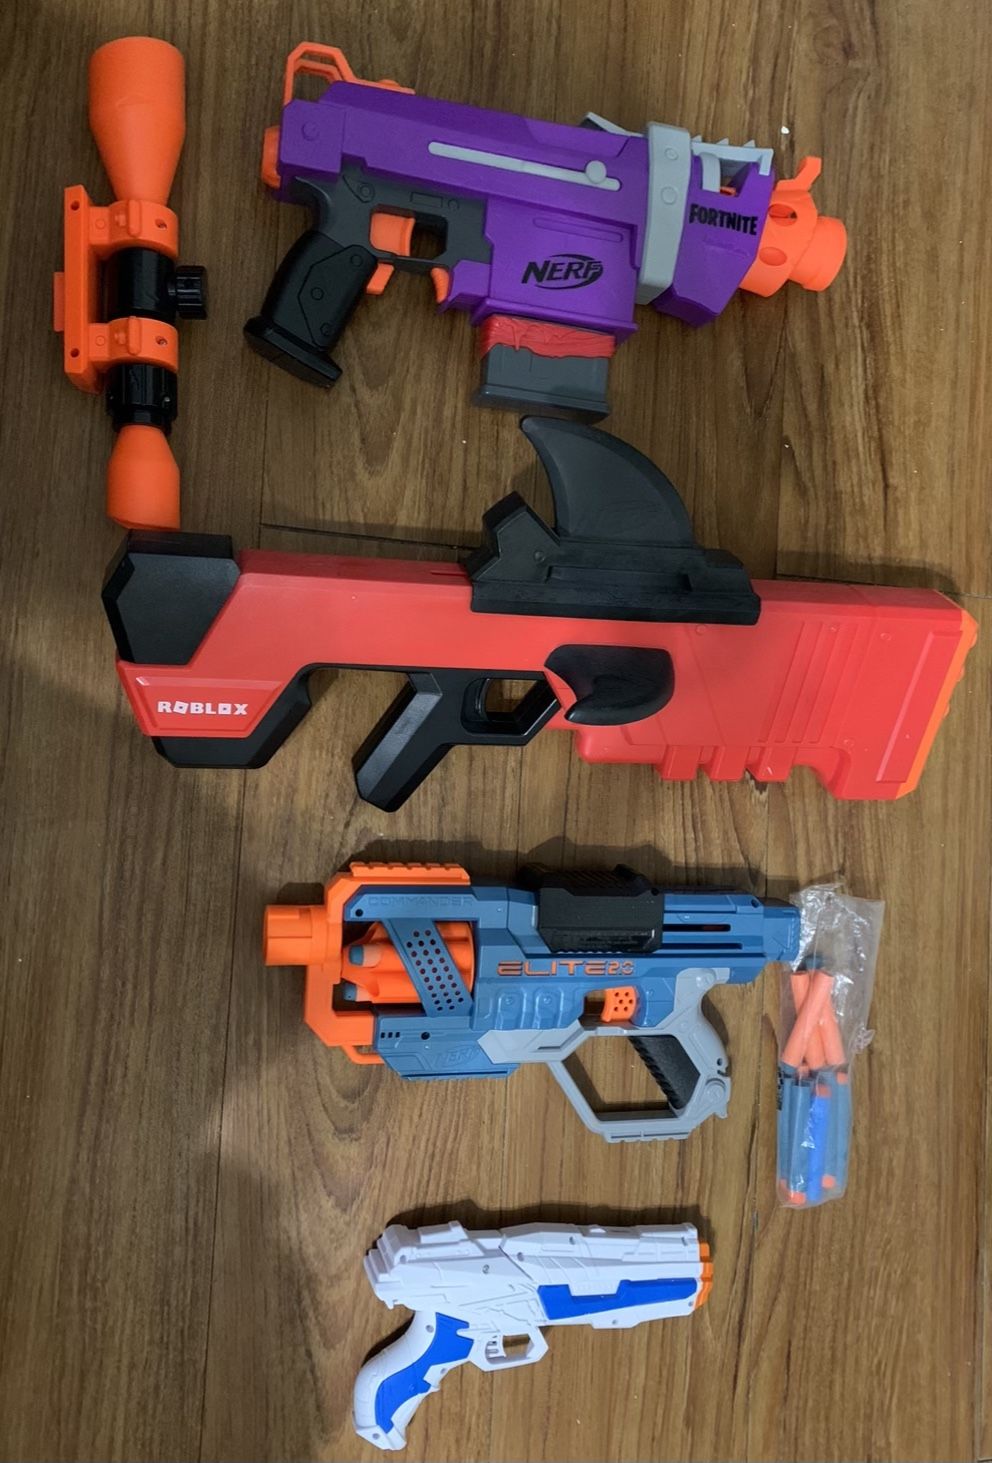 All These New Nerf Guns For 20$